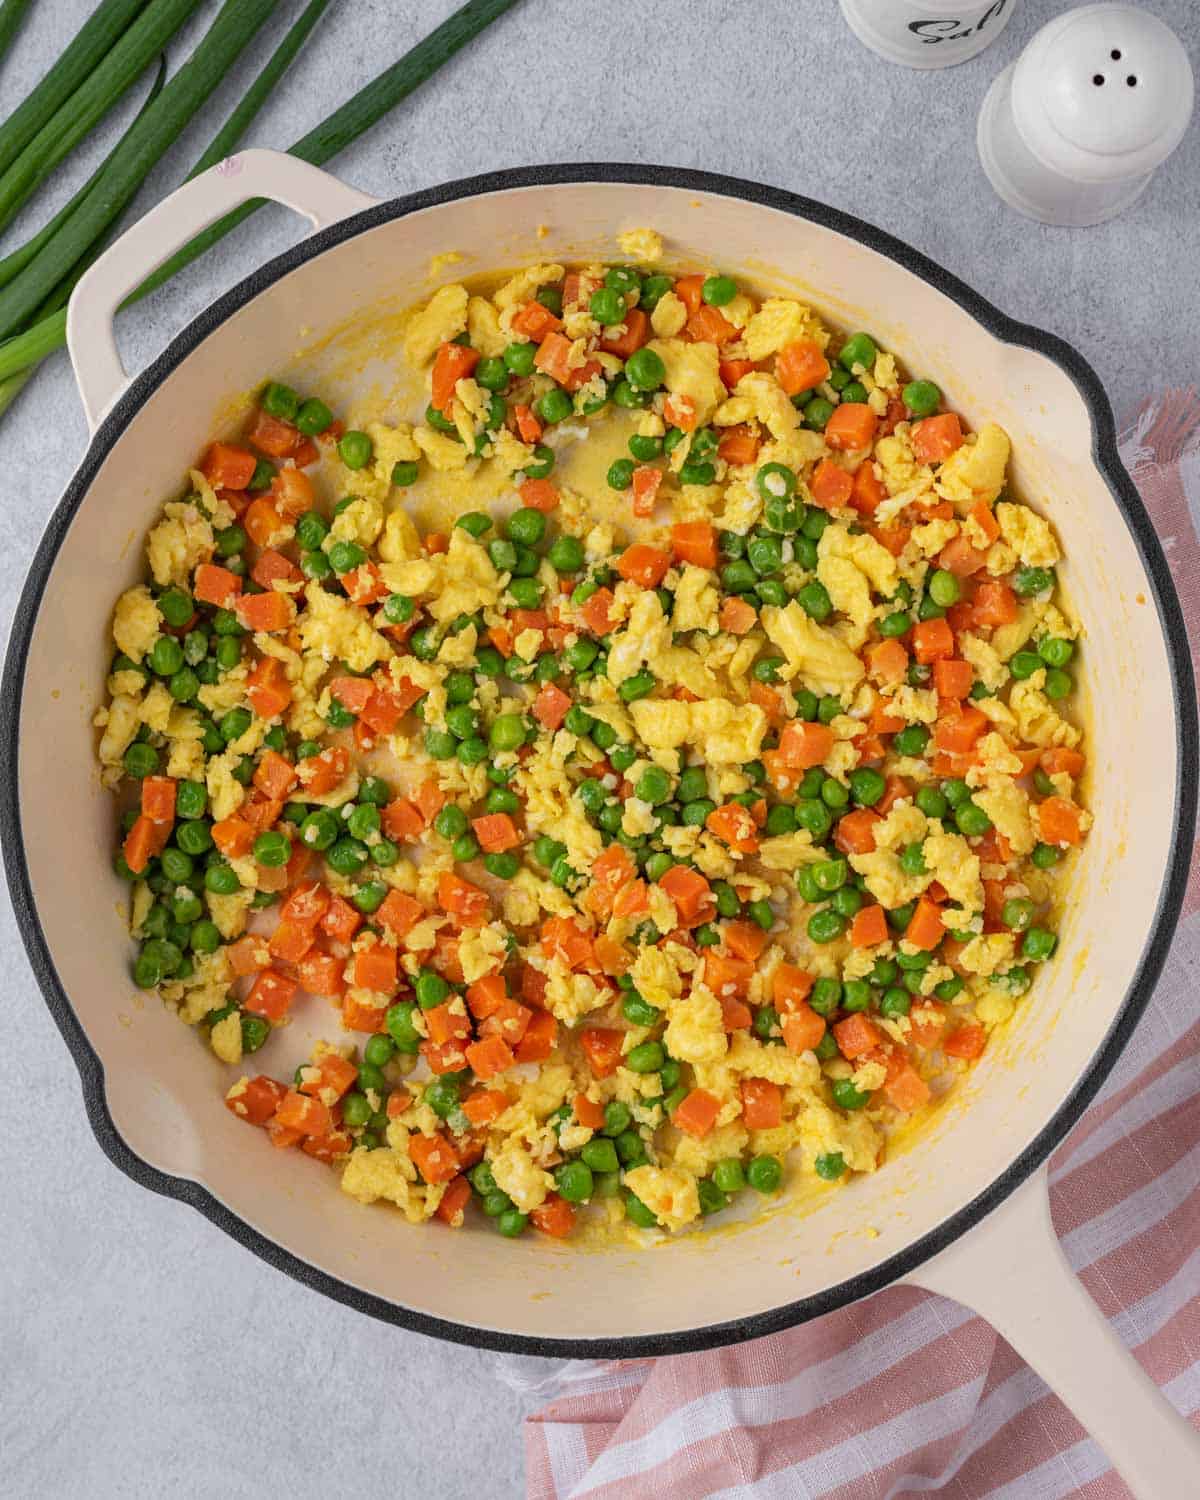 Eggs mixed with vegetables in a white pan.